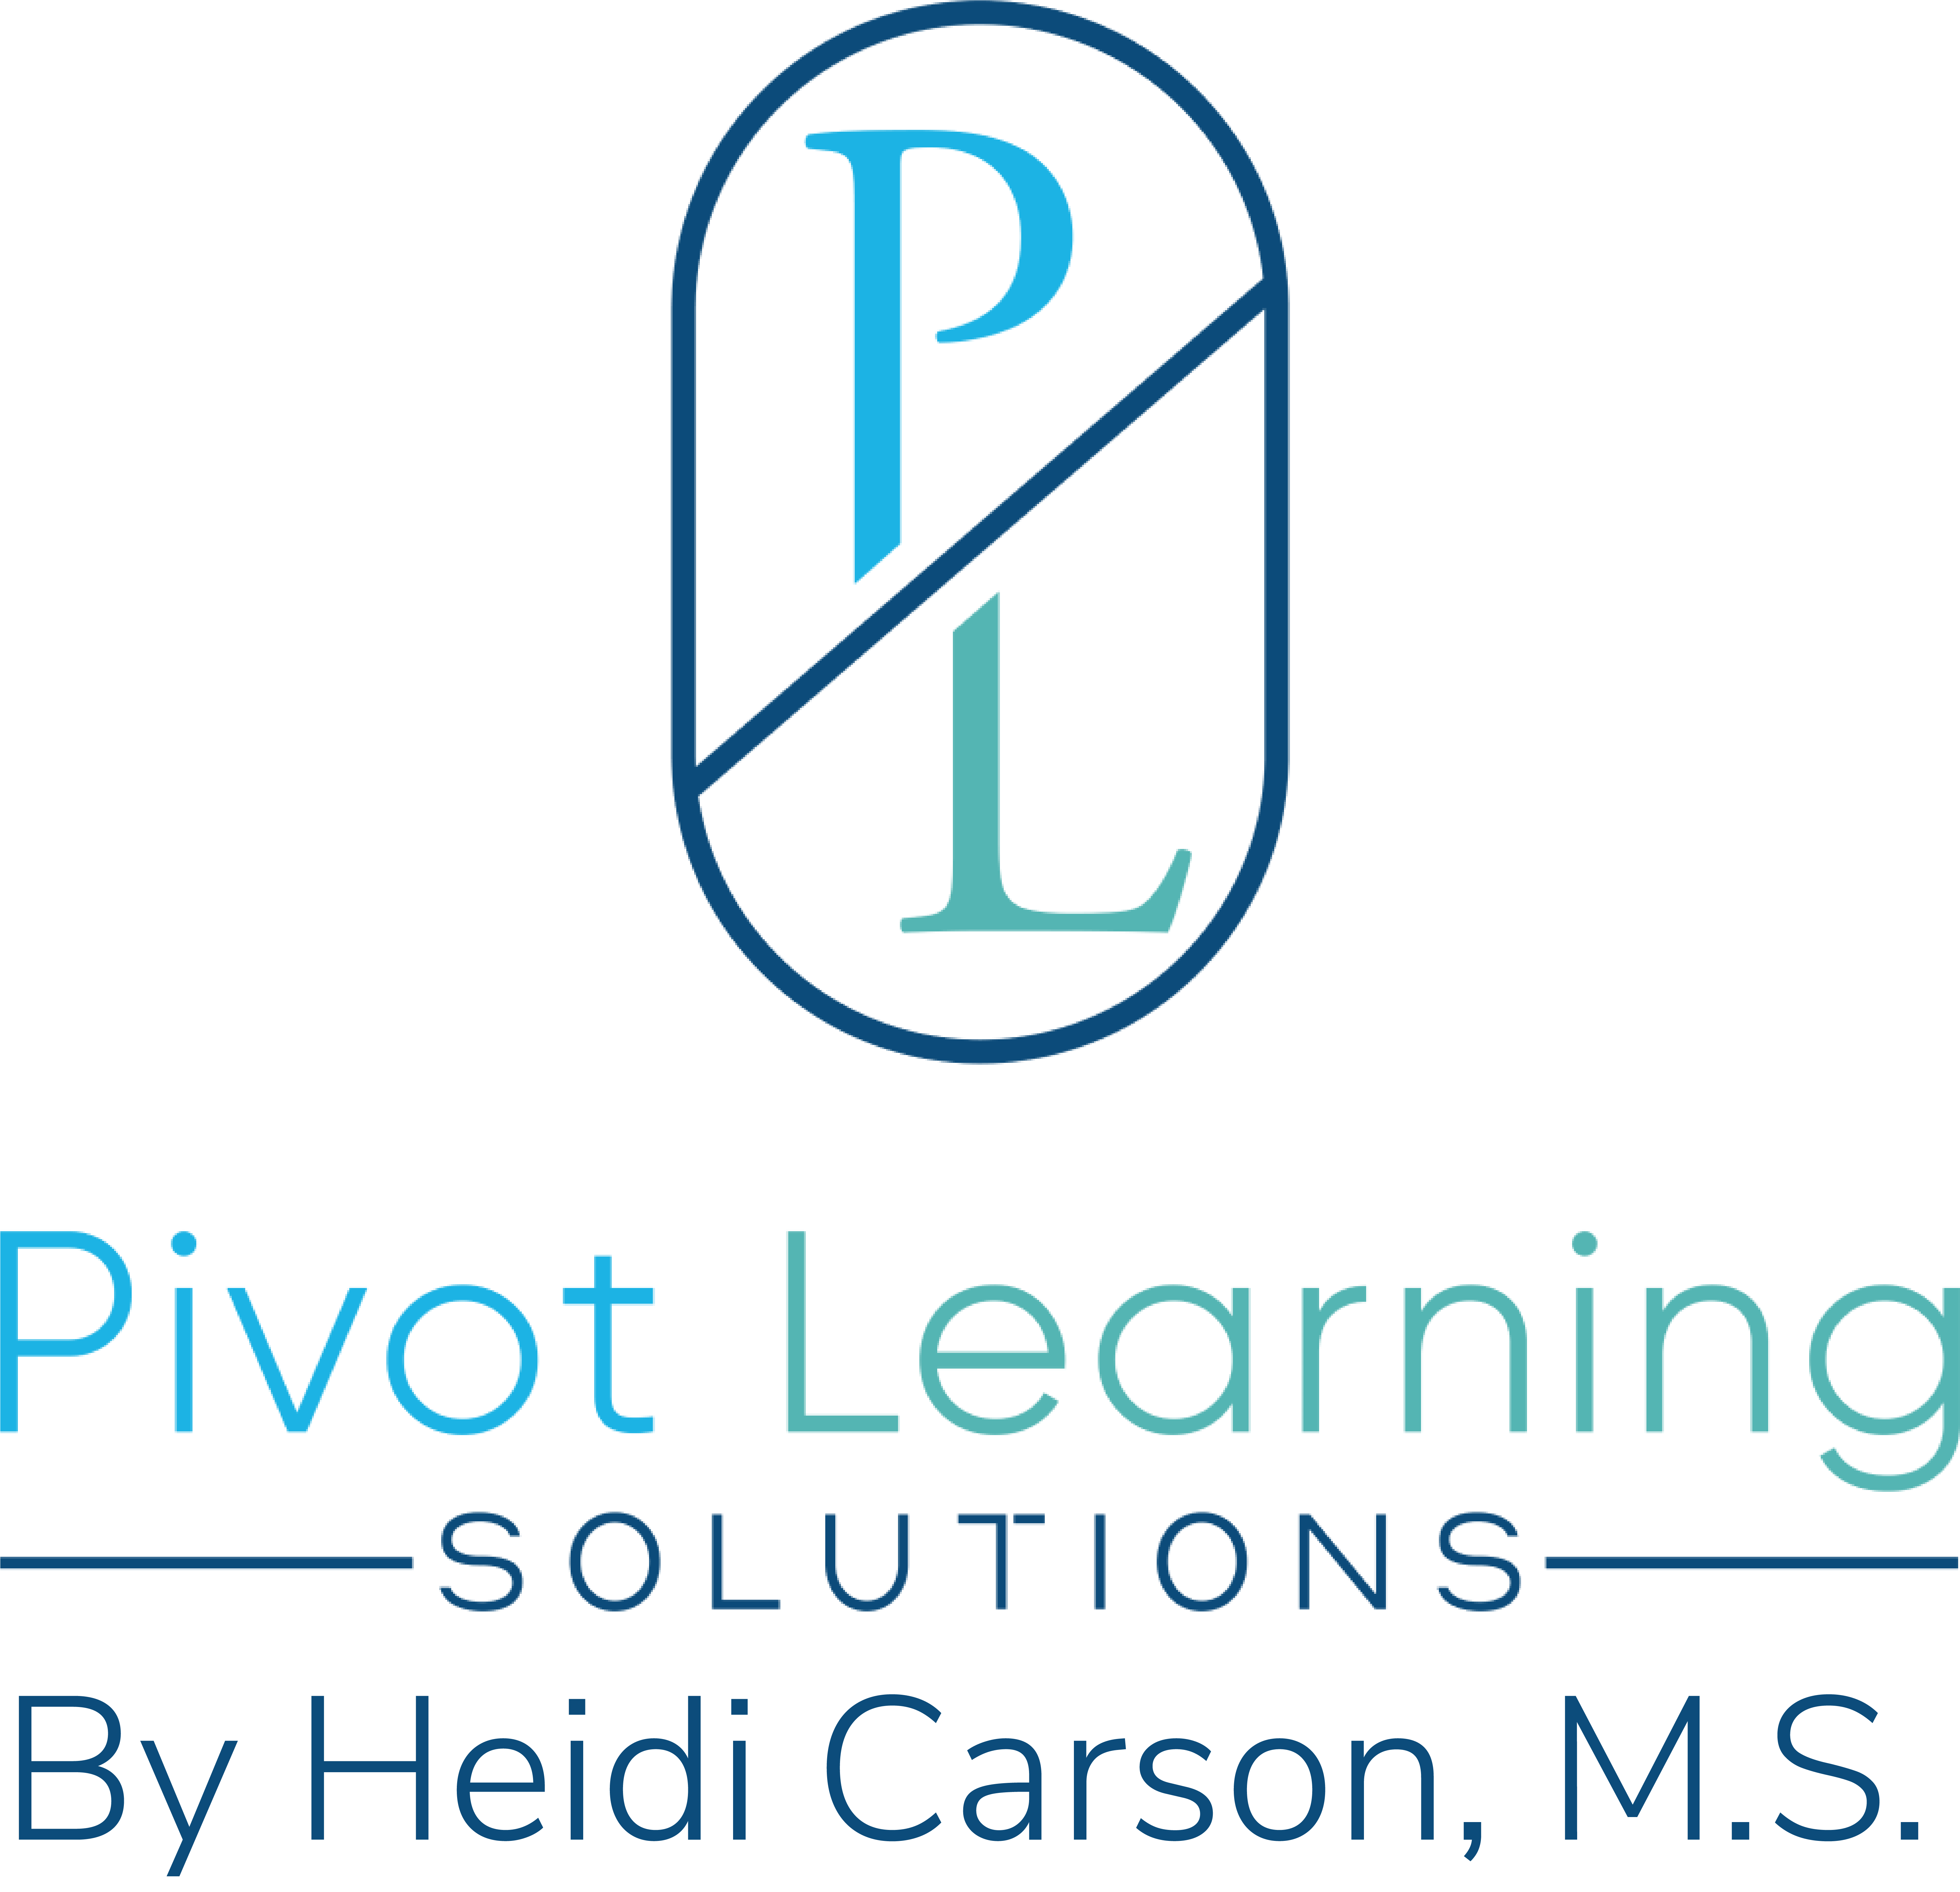 Pivot Learning Solutions